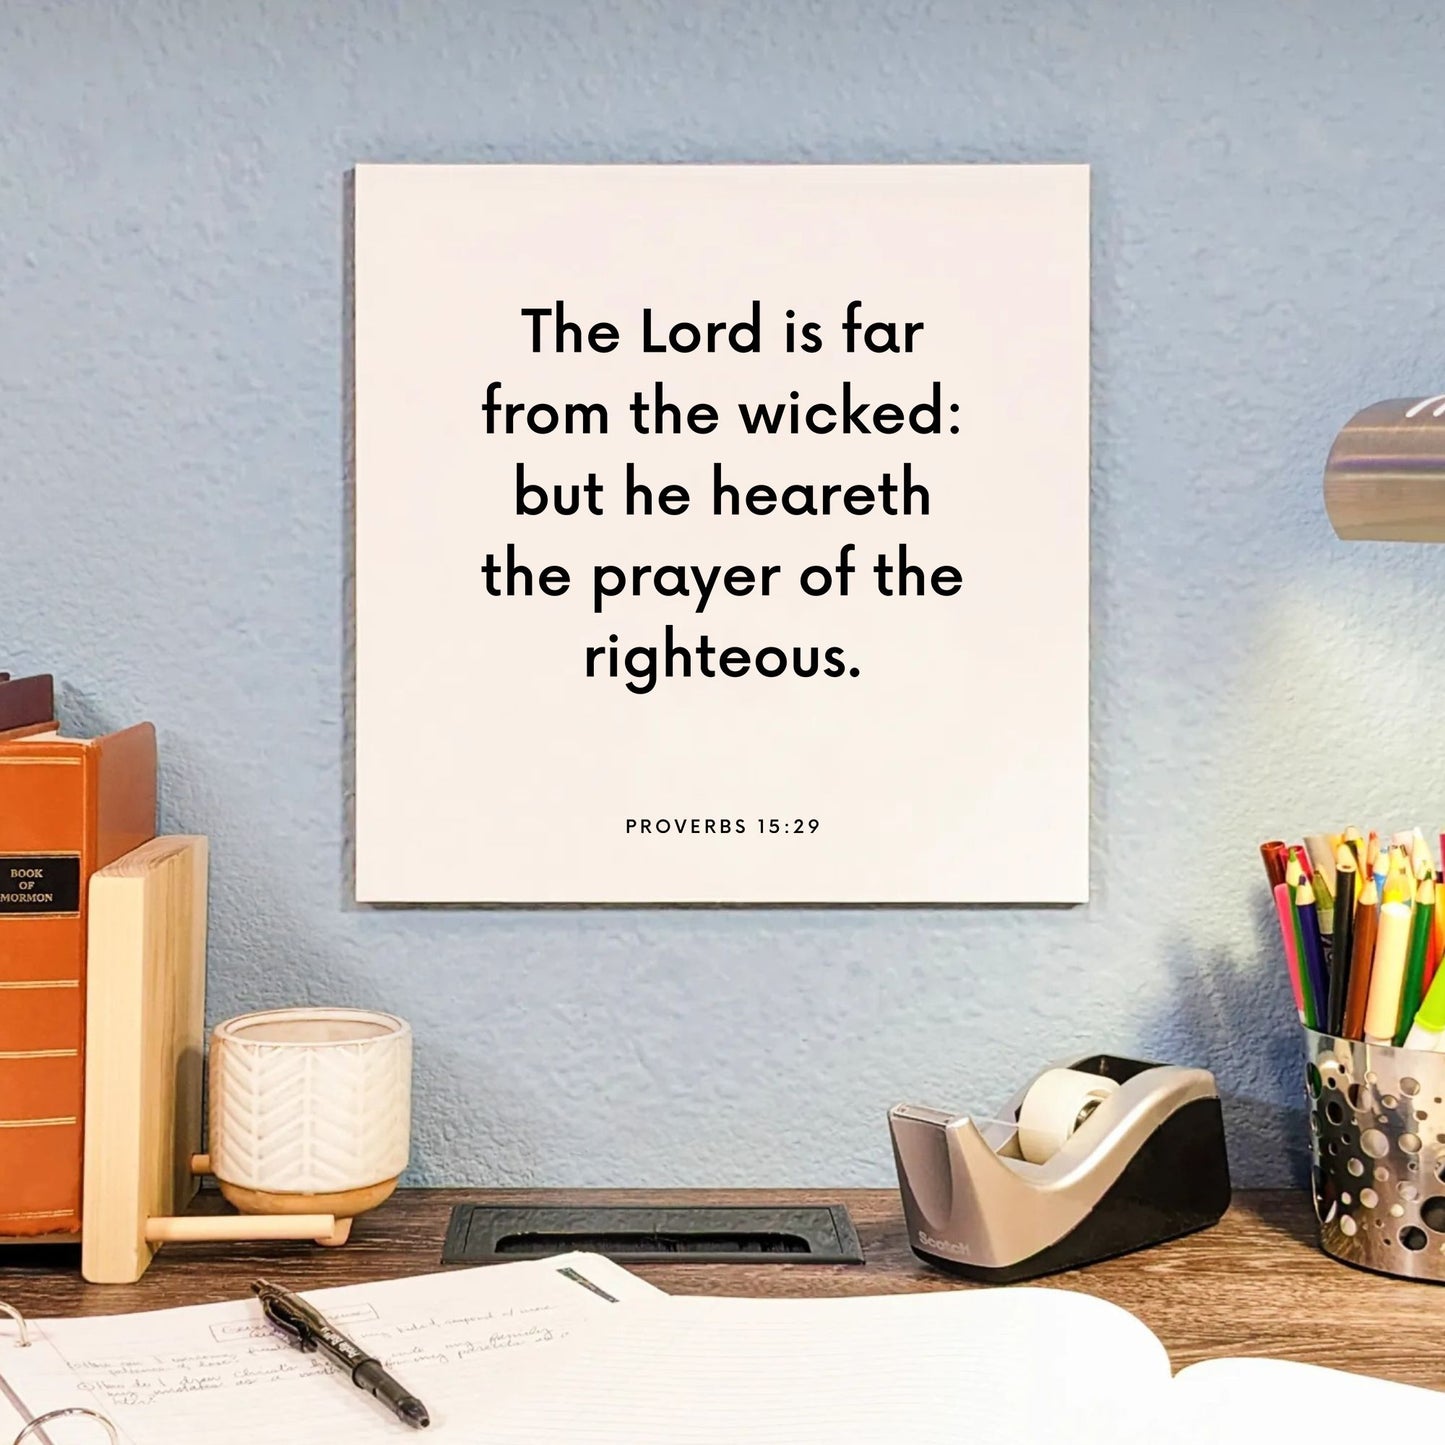 Desk mouting of the scripture tile for Proverbs 15:29 - "He heareth the prayer of the righteous"